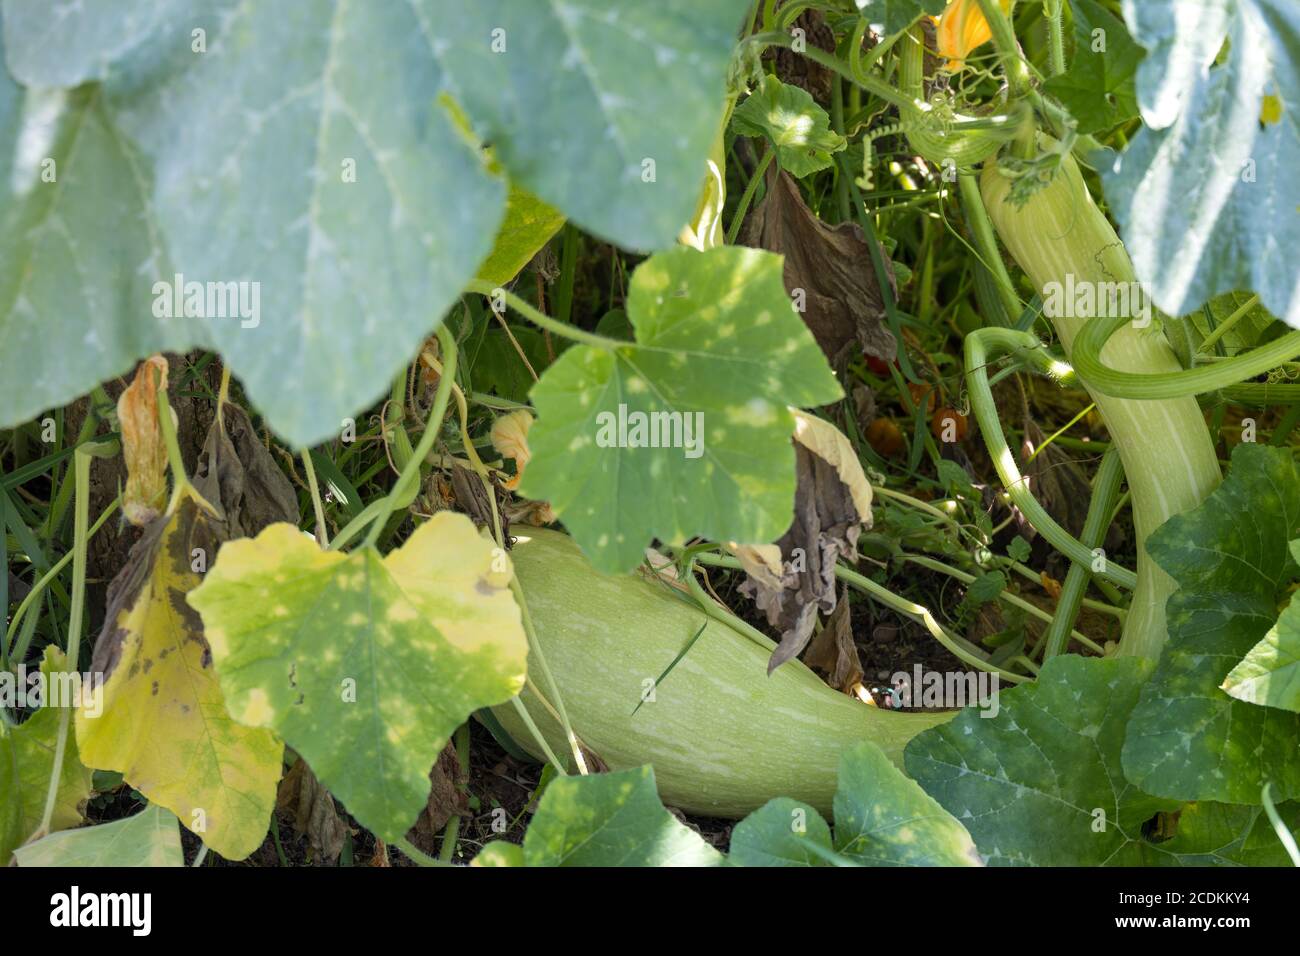 Large misshapen Zucchini or courgette growing in a garden in Italy Stock Photo